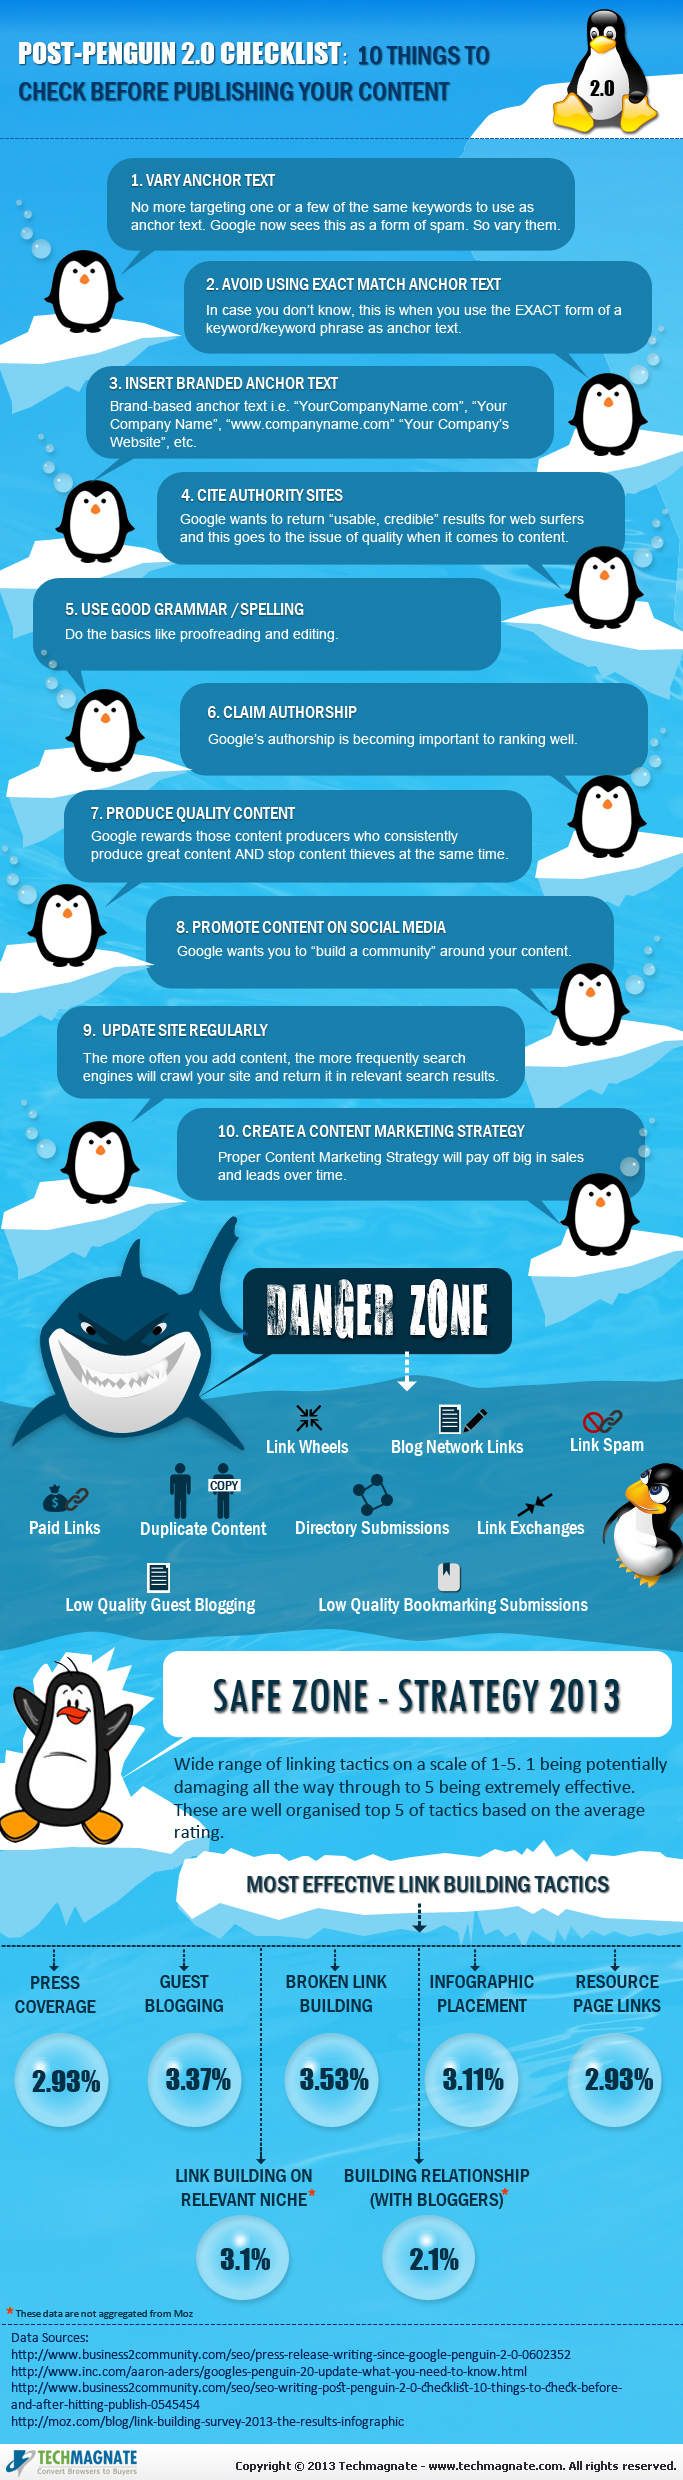 Post-Penguin 2.0 Checklist: 10 Things to Check Before Publishing Content